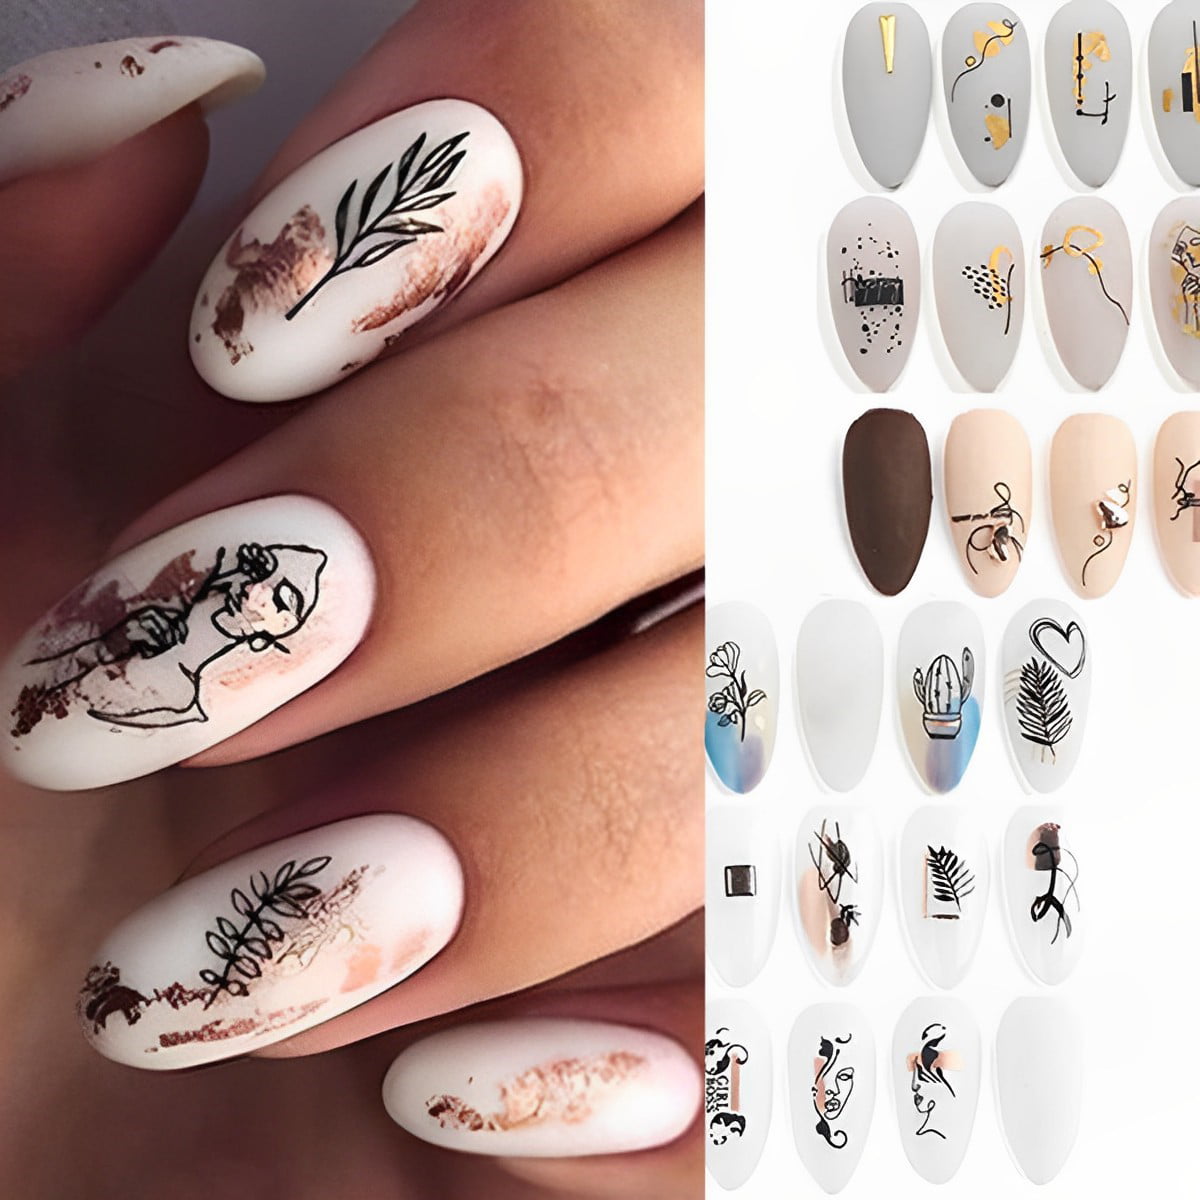 Flower Leaves Water Decals Stickers For Nail Art Decoration | Nail stickers  designs, Nail decals designs, Shiny nails designs